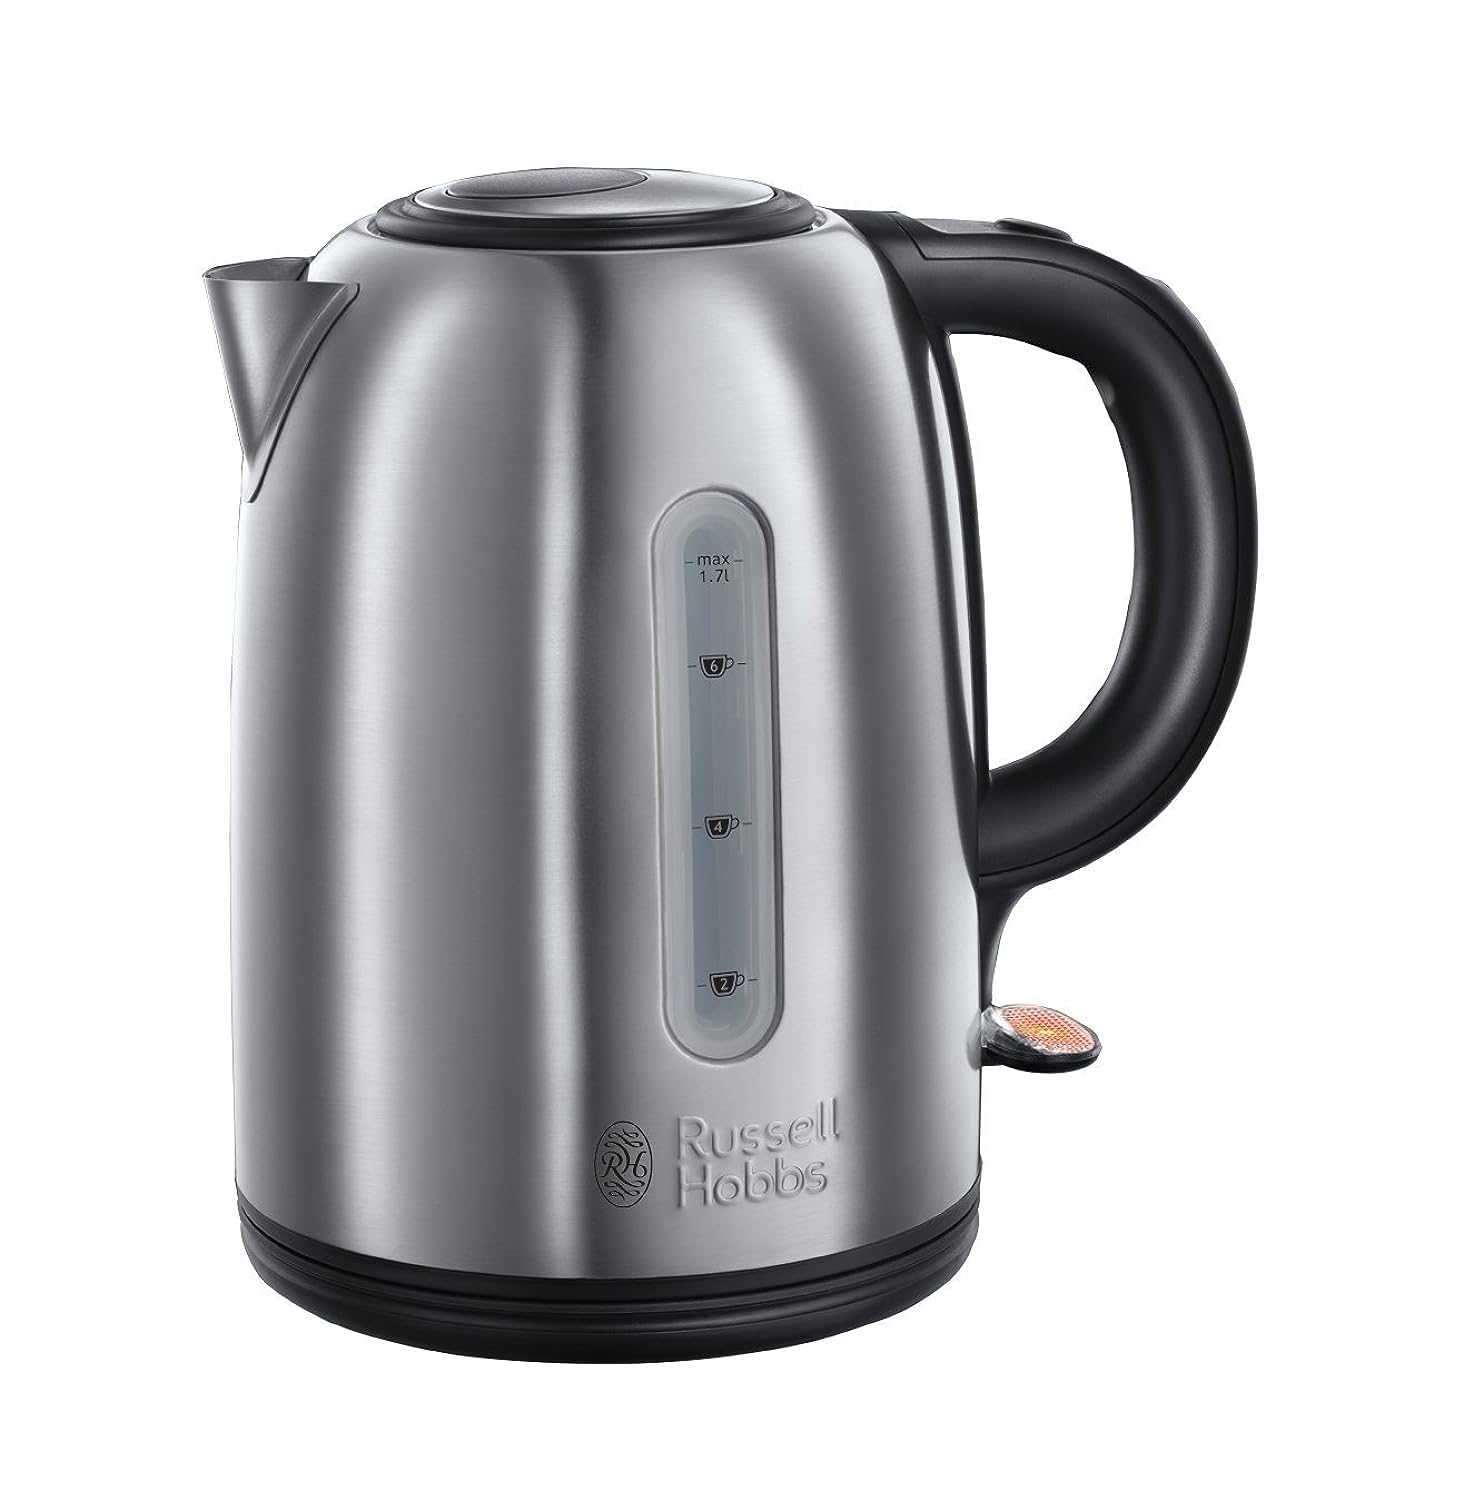 Russell Hobbs Snowdon Stainless Steel Cordless 1.7L Capacity 3000W Electric Kettle